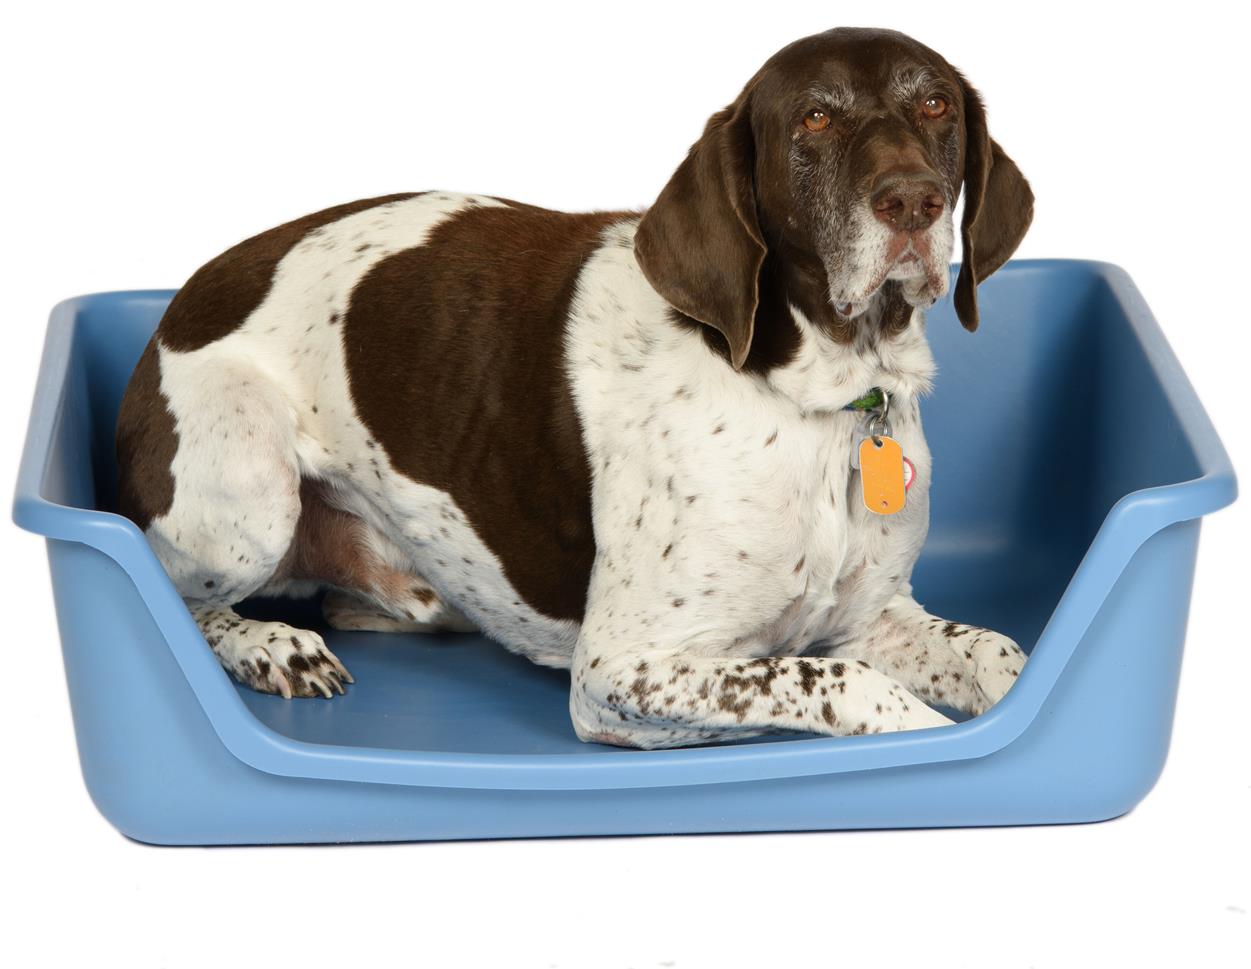 fabri form pet bed with dog laying down inside